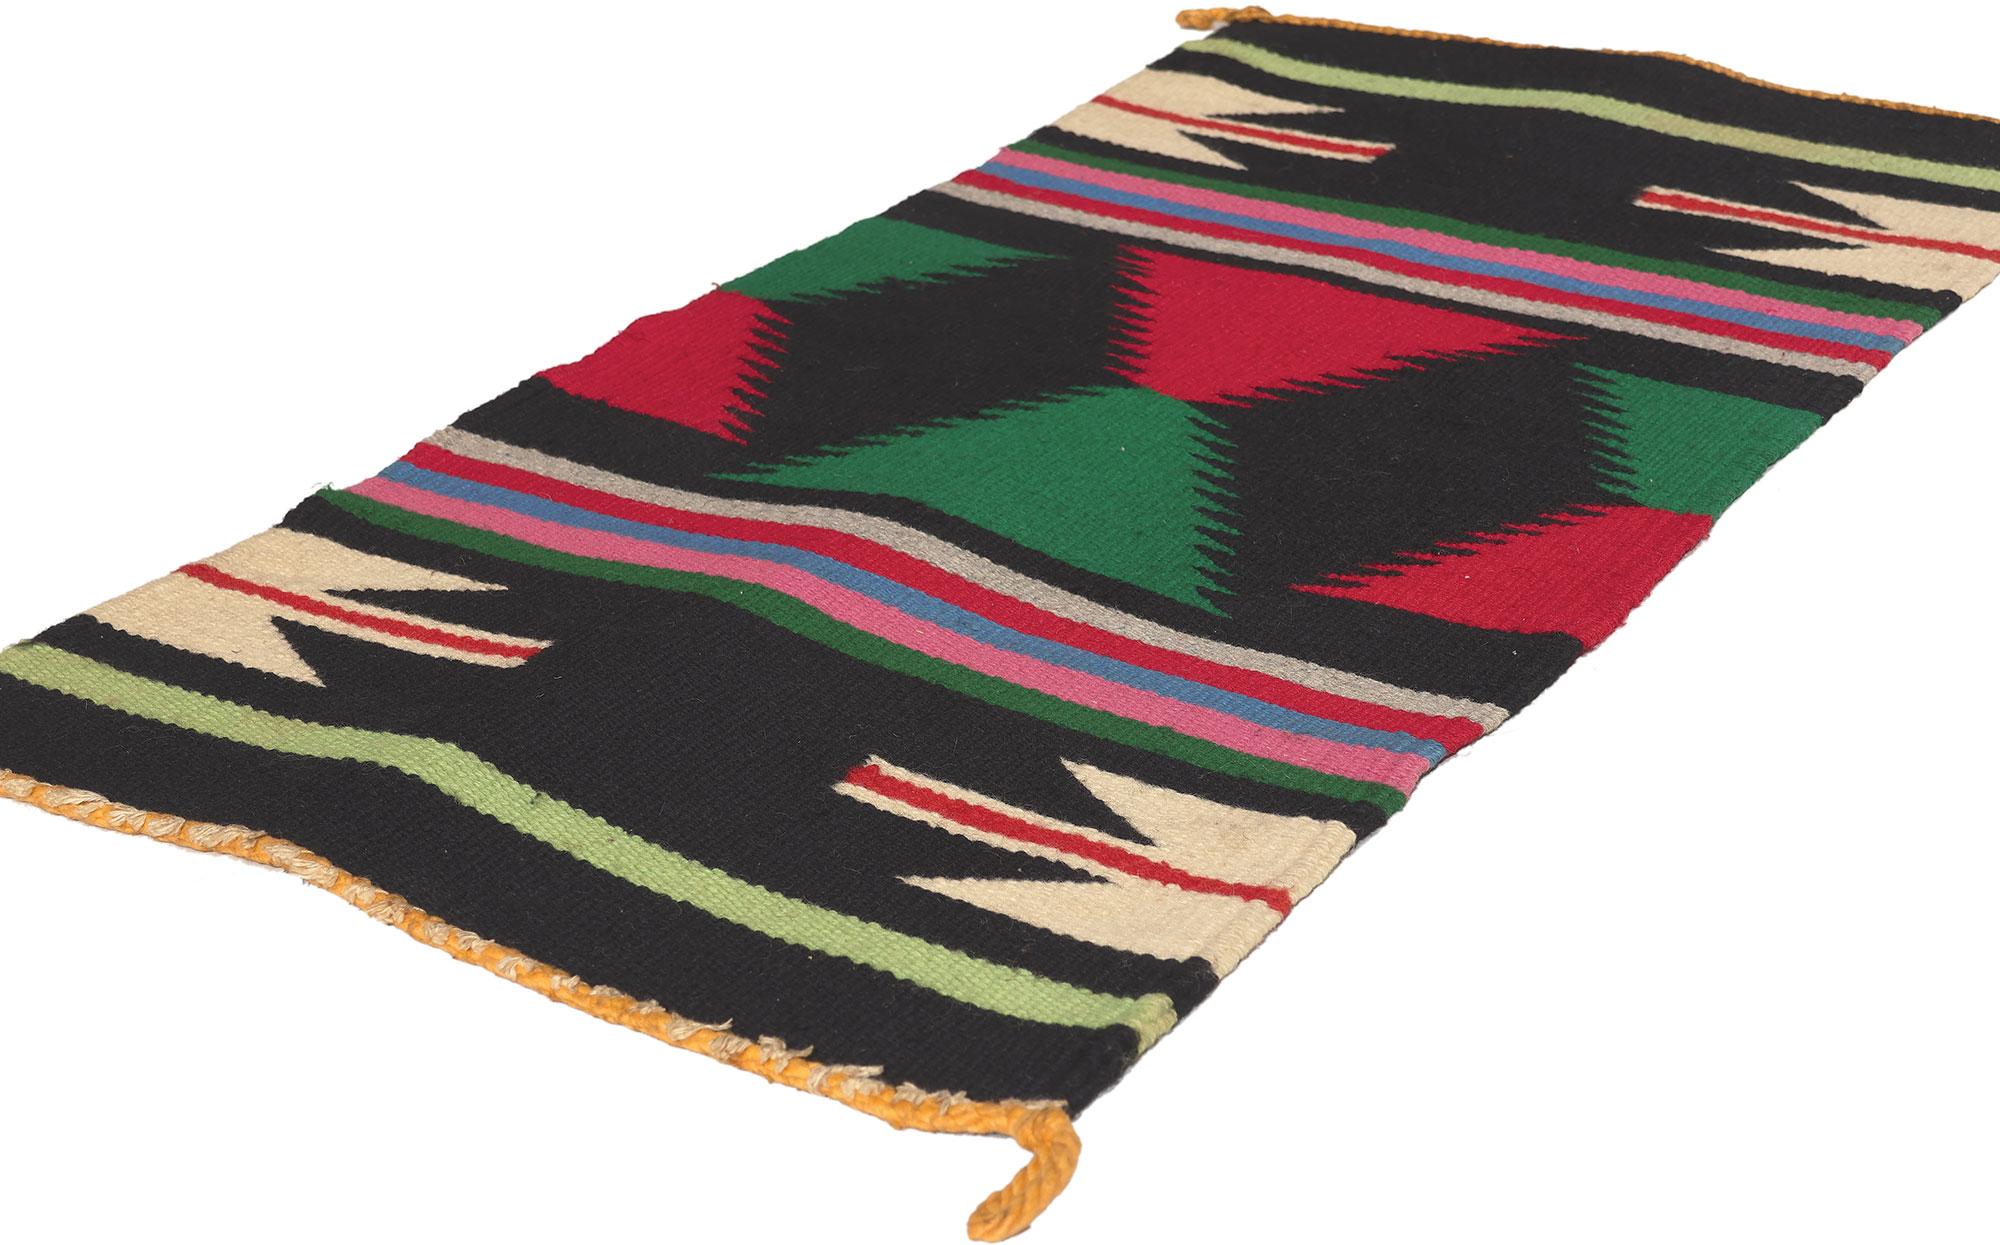 78628 Vintage Pueblo Textile, 01'06 x 03'01.
Maximalism meets boho chic in this handwoven vintage Southwest Pueblo kilim rug. The eclectic sensibility and lively colors woven into this piece create a maximalist boho chic style. The abrashed black